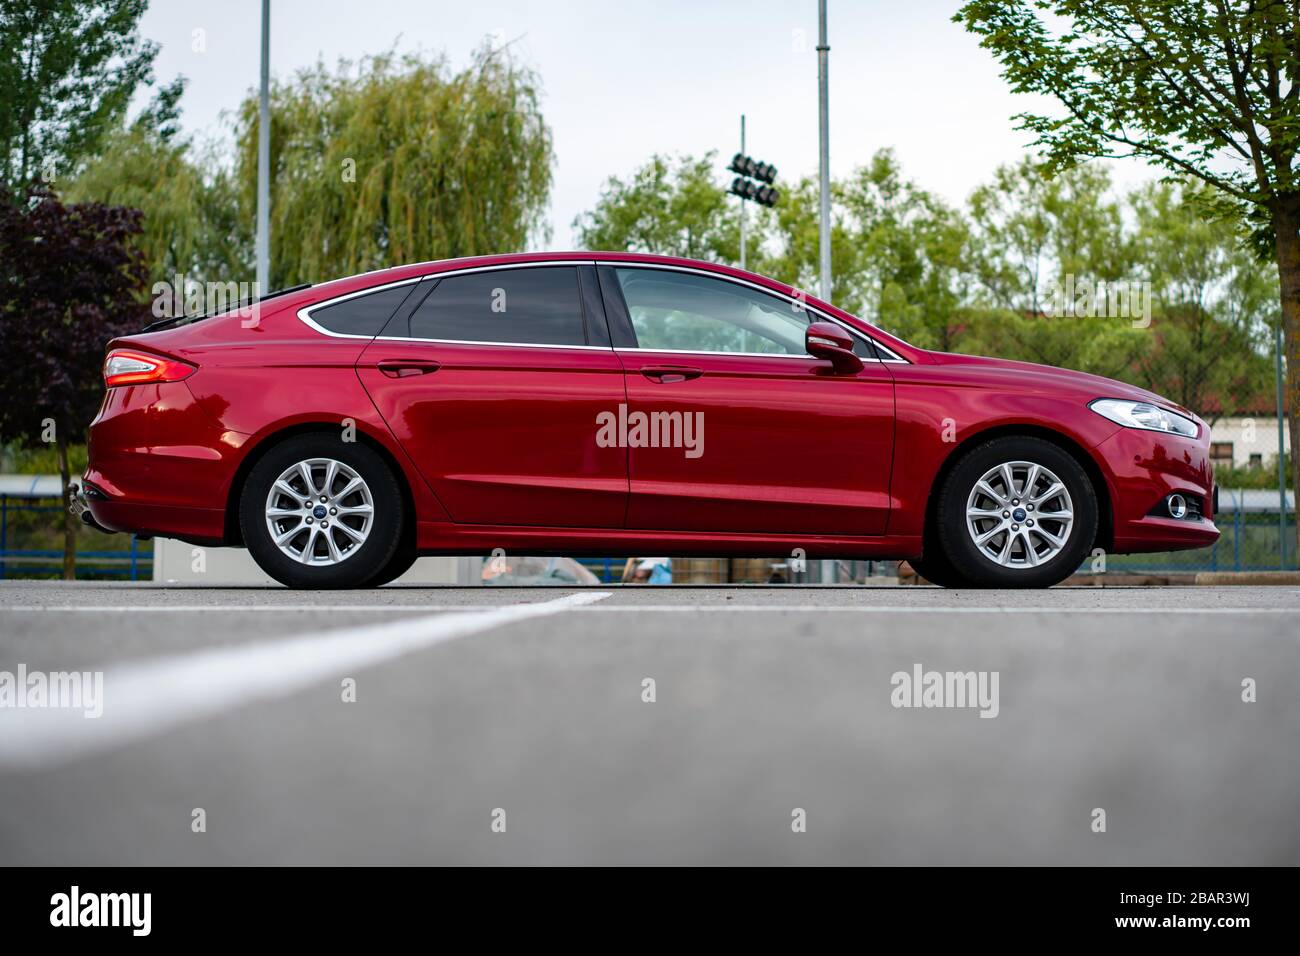 Ford Mondeo MK5 Titanium trim, in Ruby red coloud, sedan, photosession in an empty parking lot. Isolated car, nice photos Stock Photo